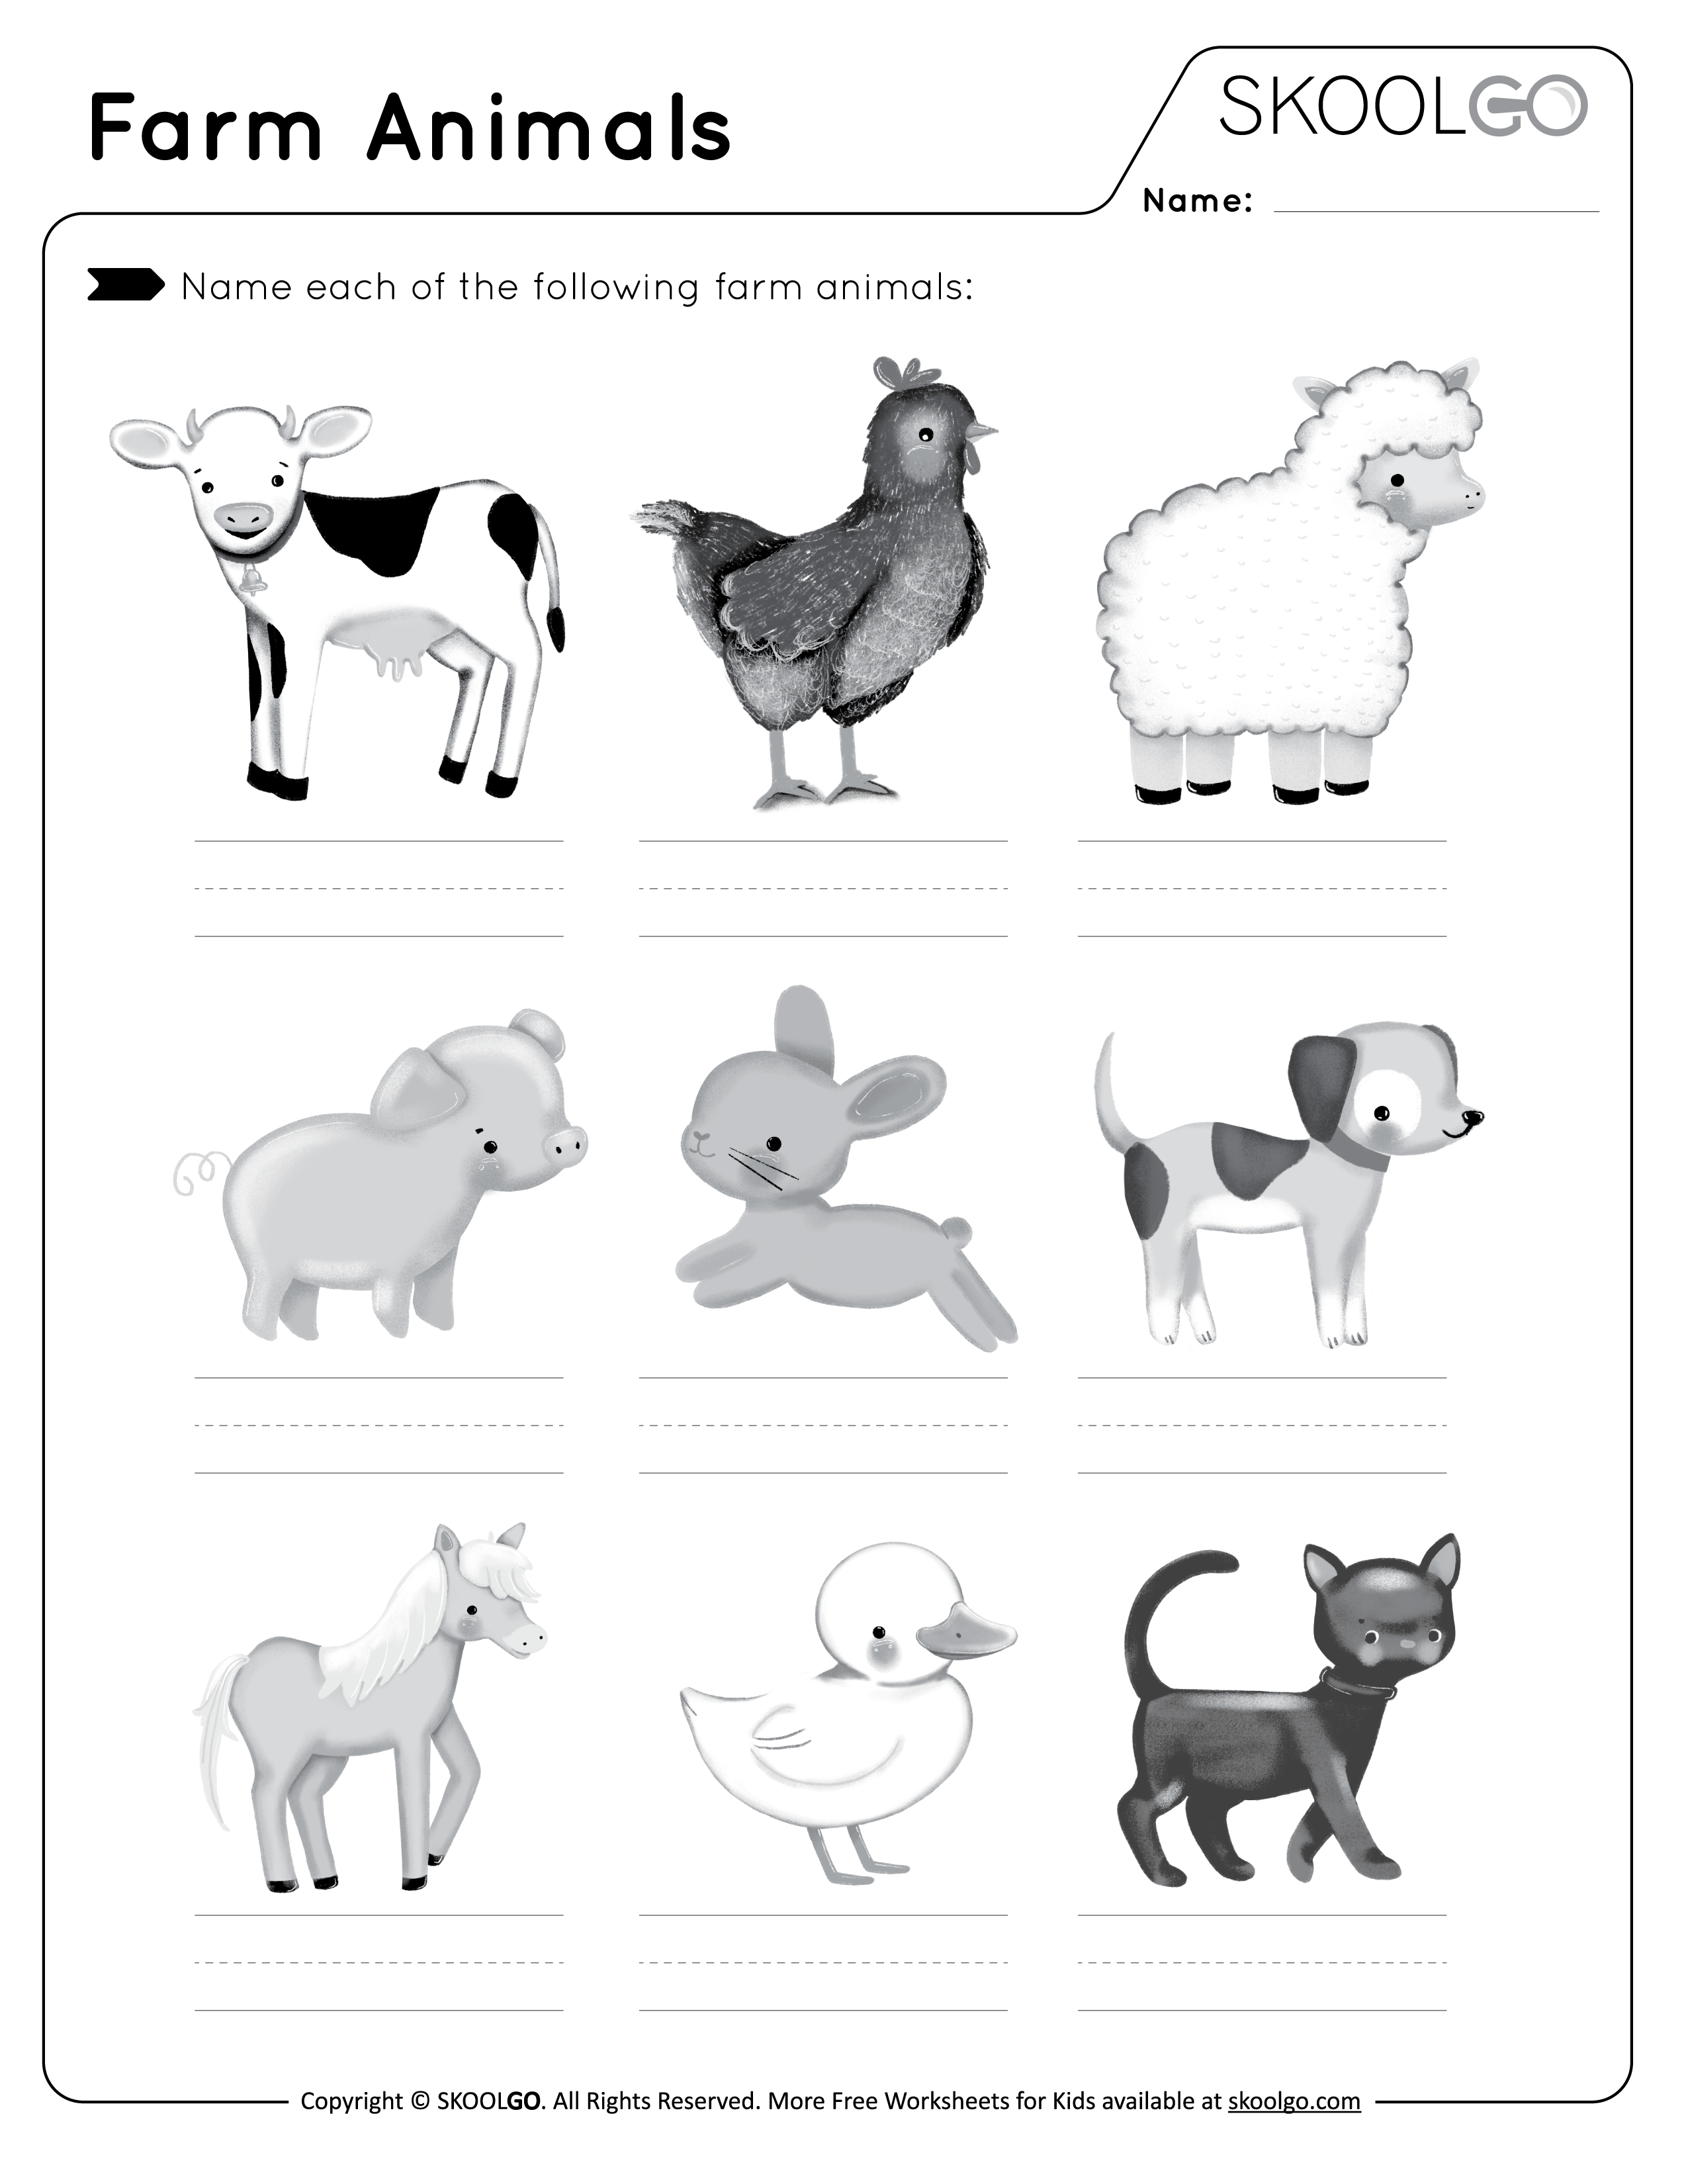 Farm Animals - Free Black and White Worksheet Activity for Kids